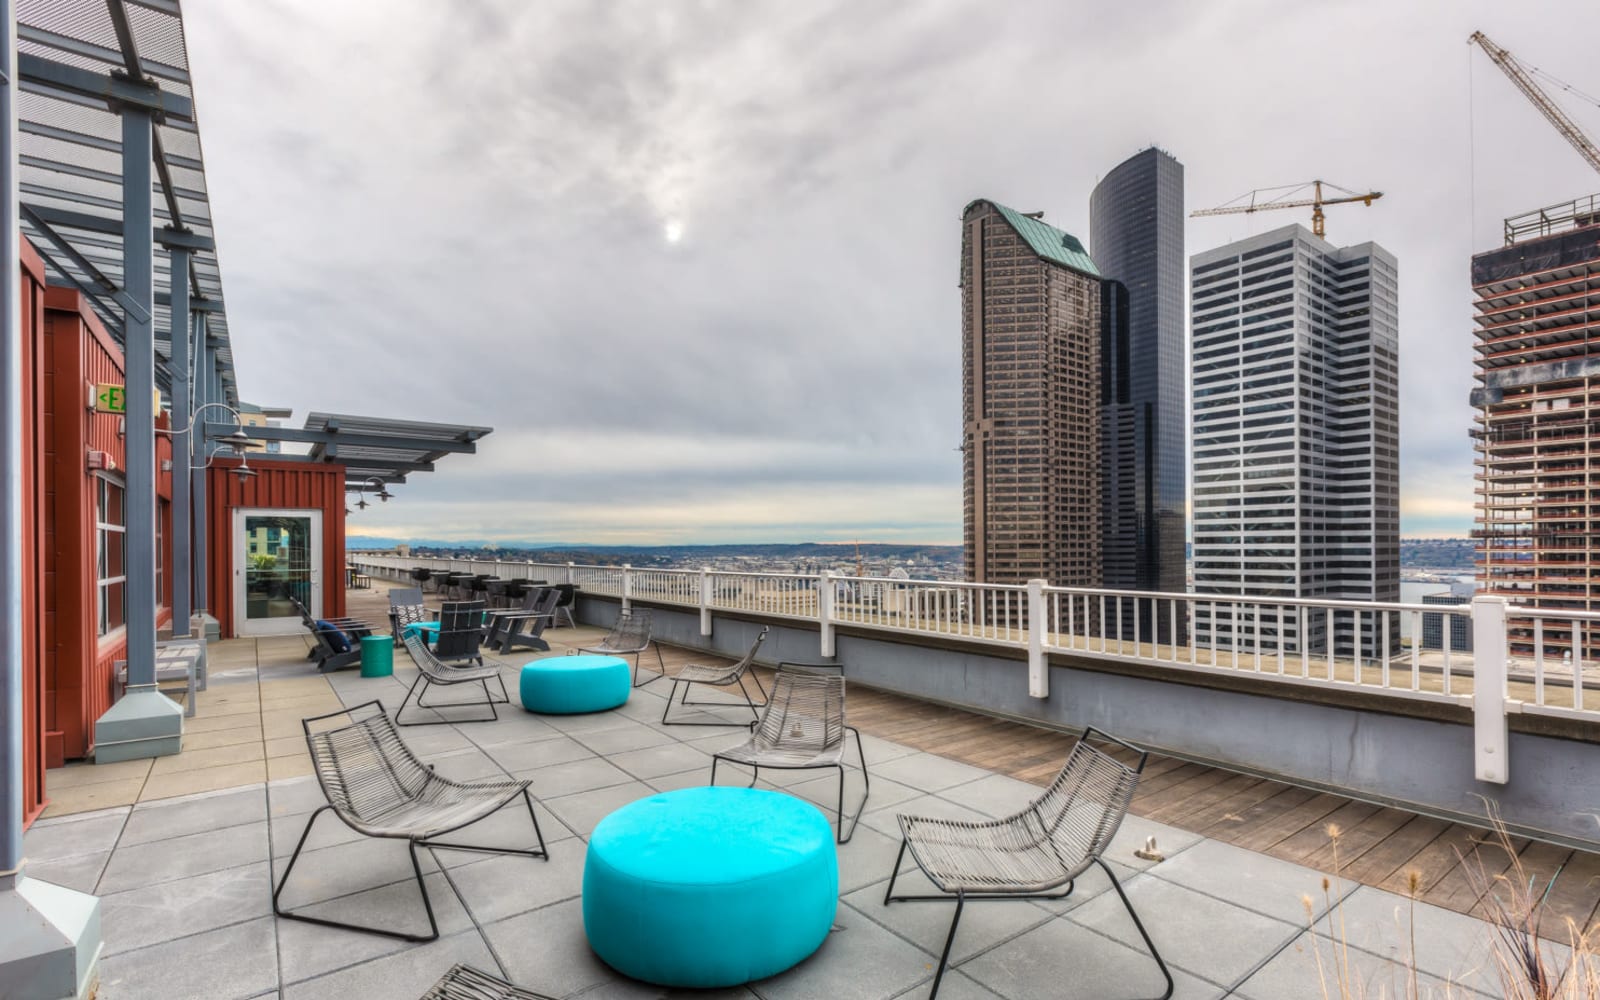 Casual seating area with rooftop views at M Street in Seattle, Washington